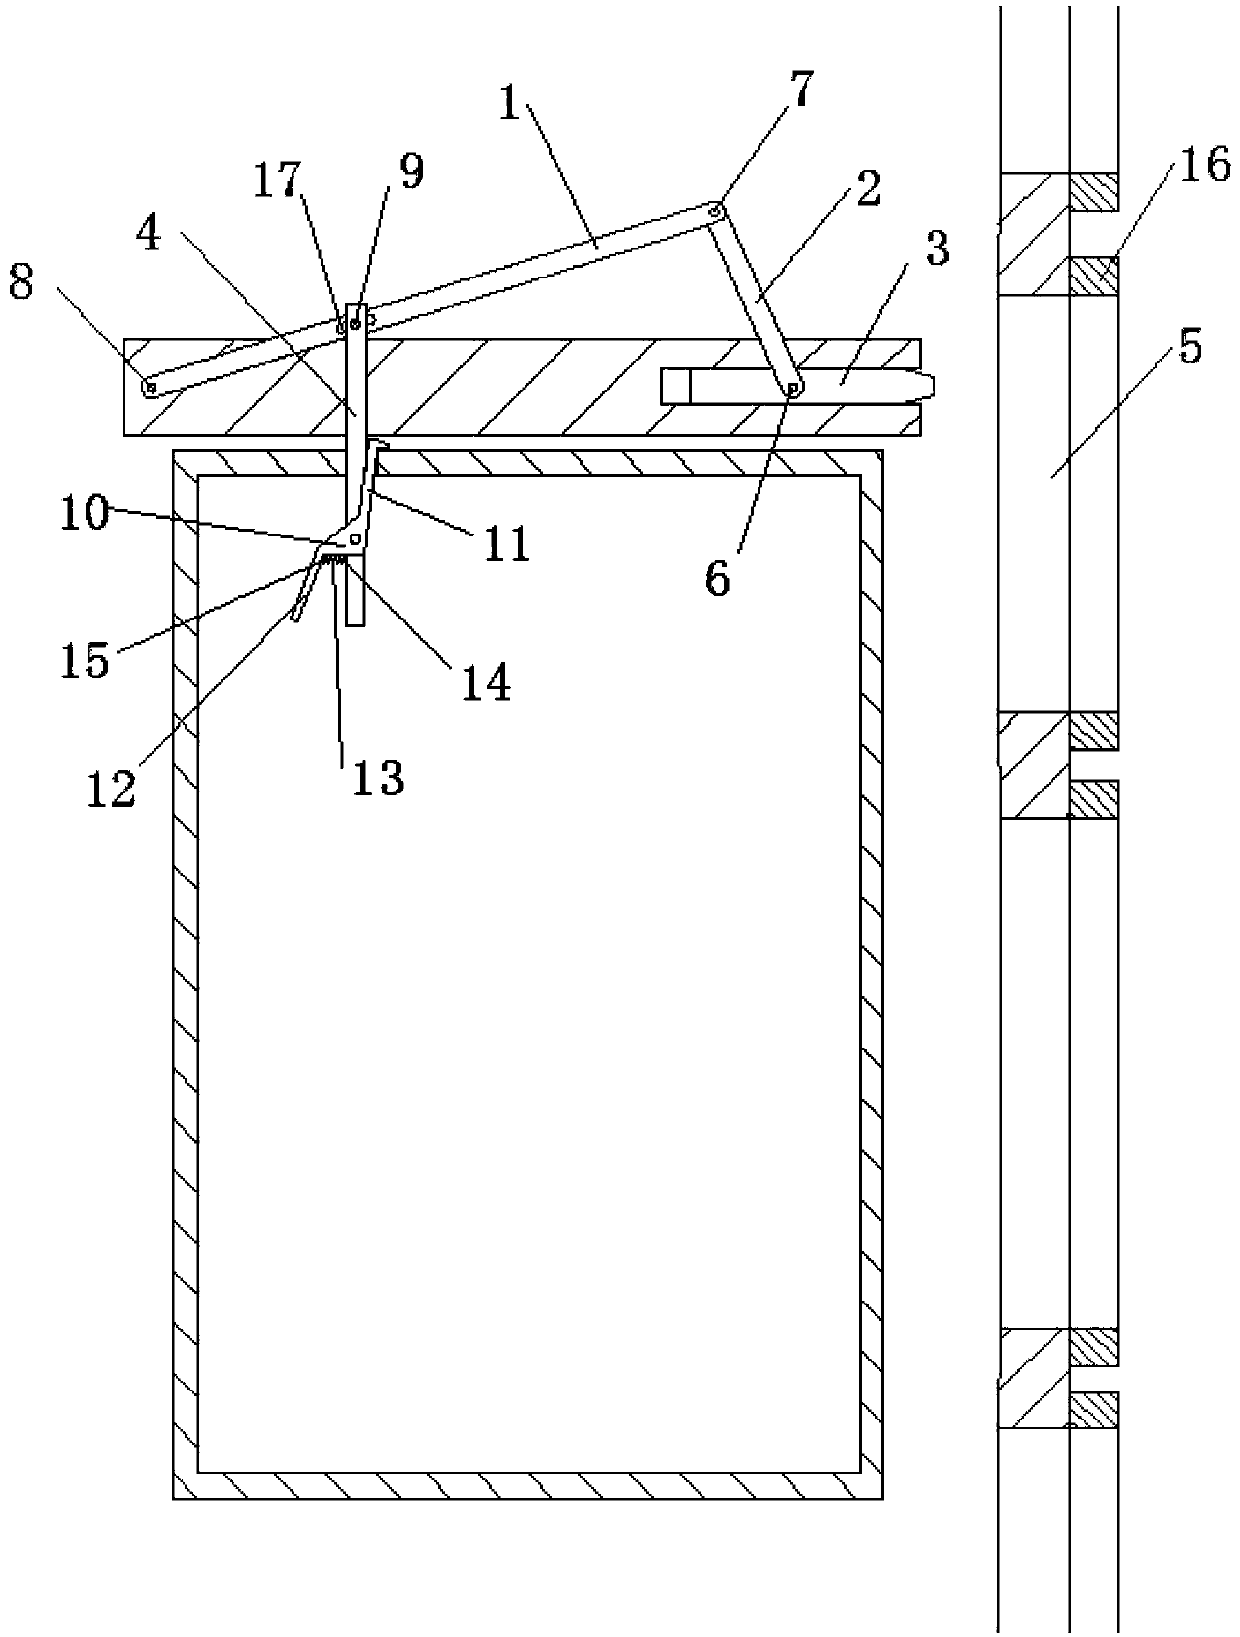 A manual anti-drop crank connecting rod device for vertical elevators